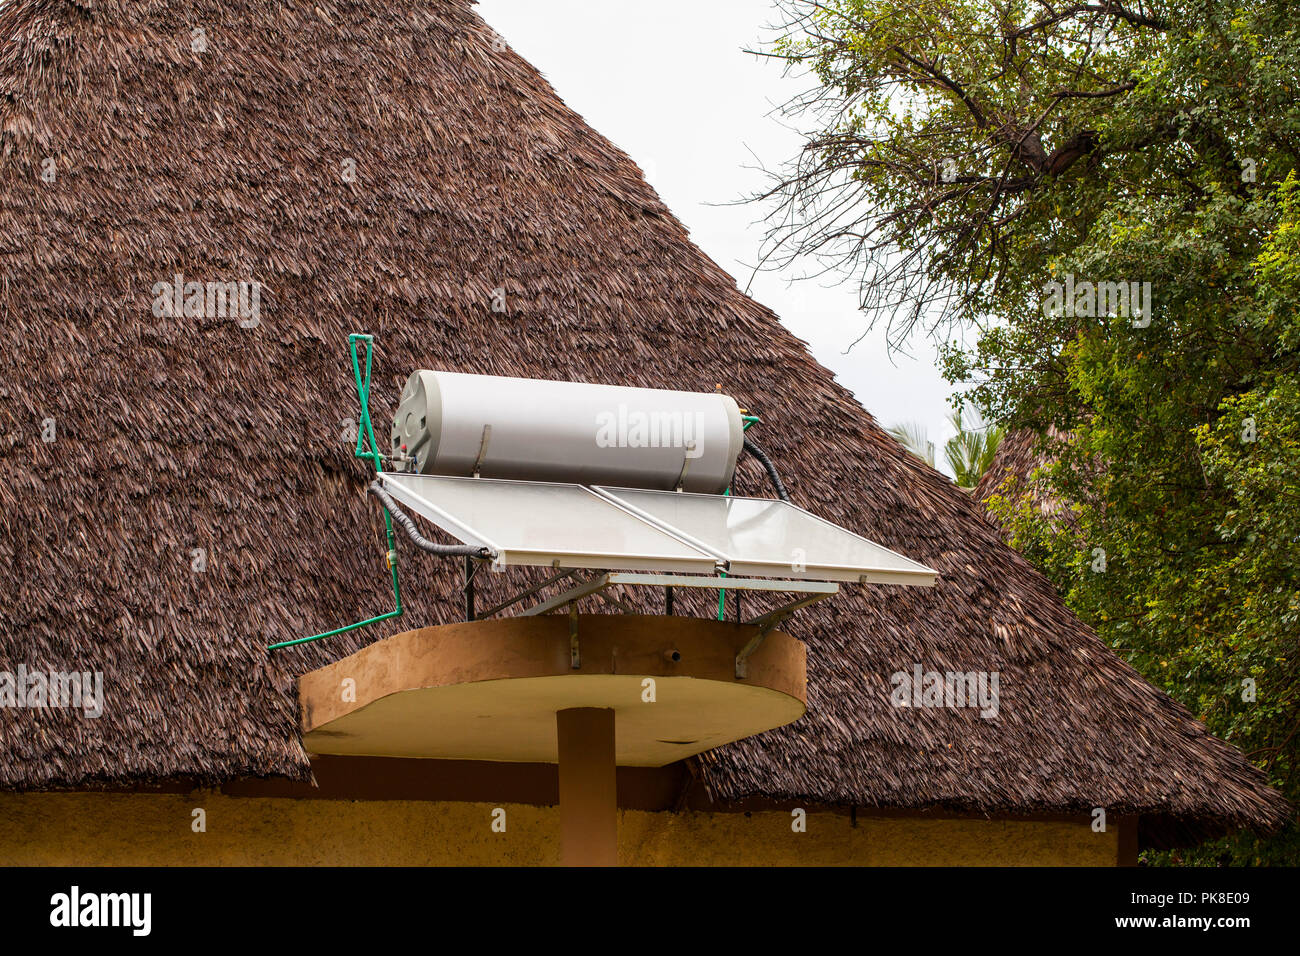 Systems for heating water from sunlight ( sun collectors) on roofs of hotel in Kenya Stock Photo